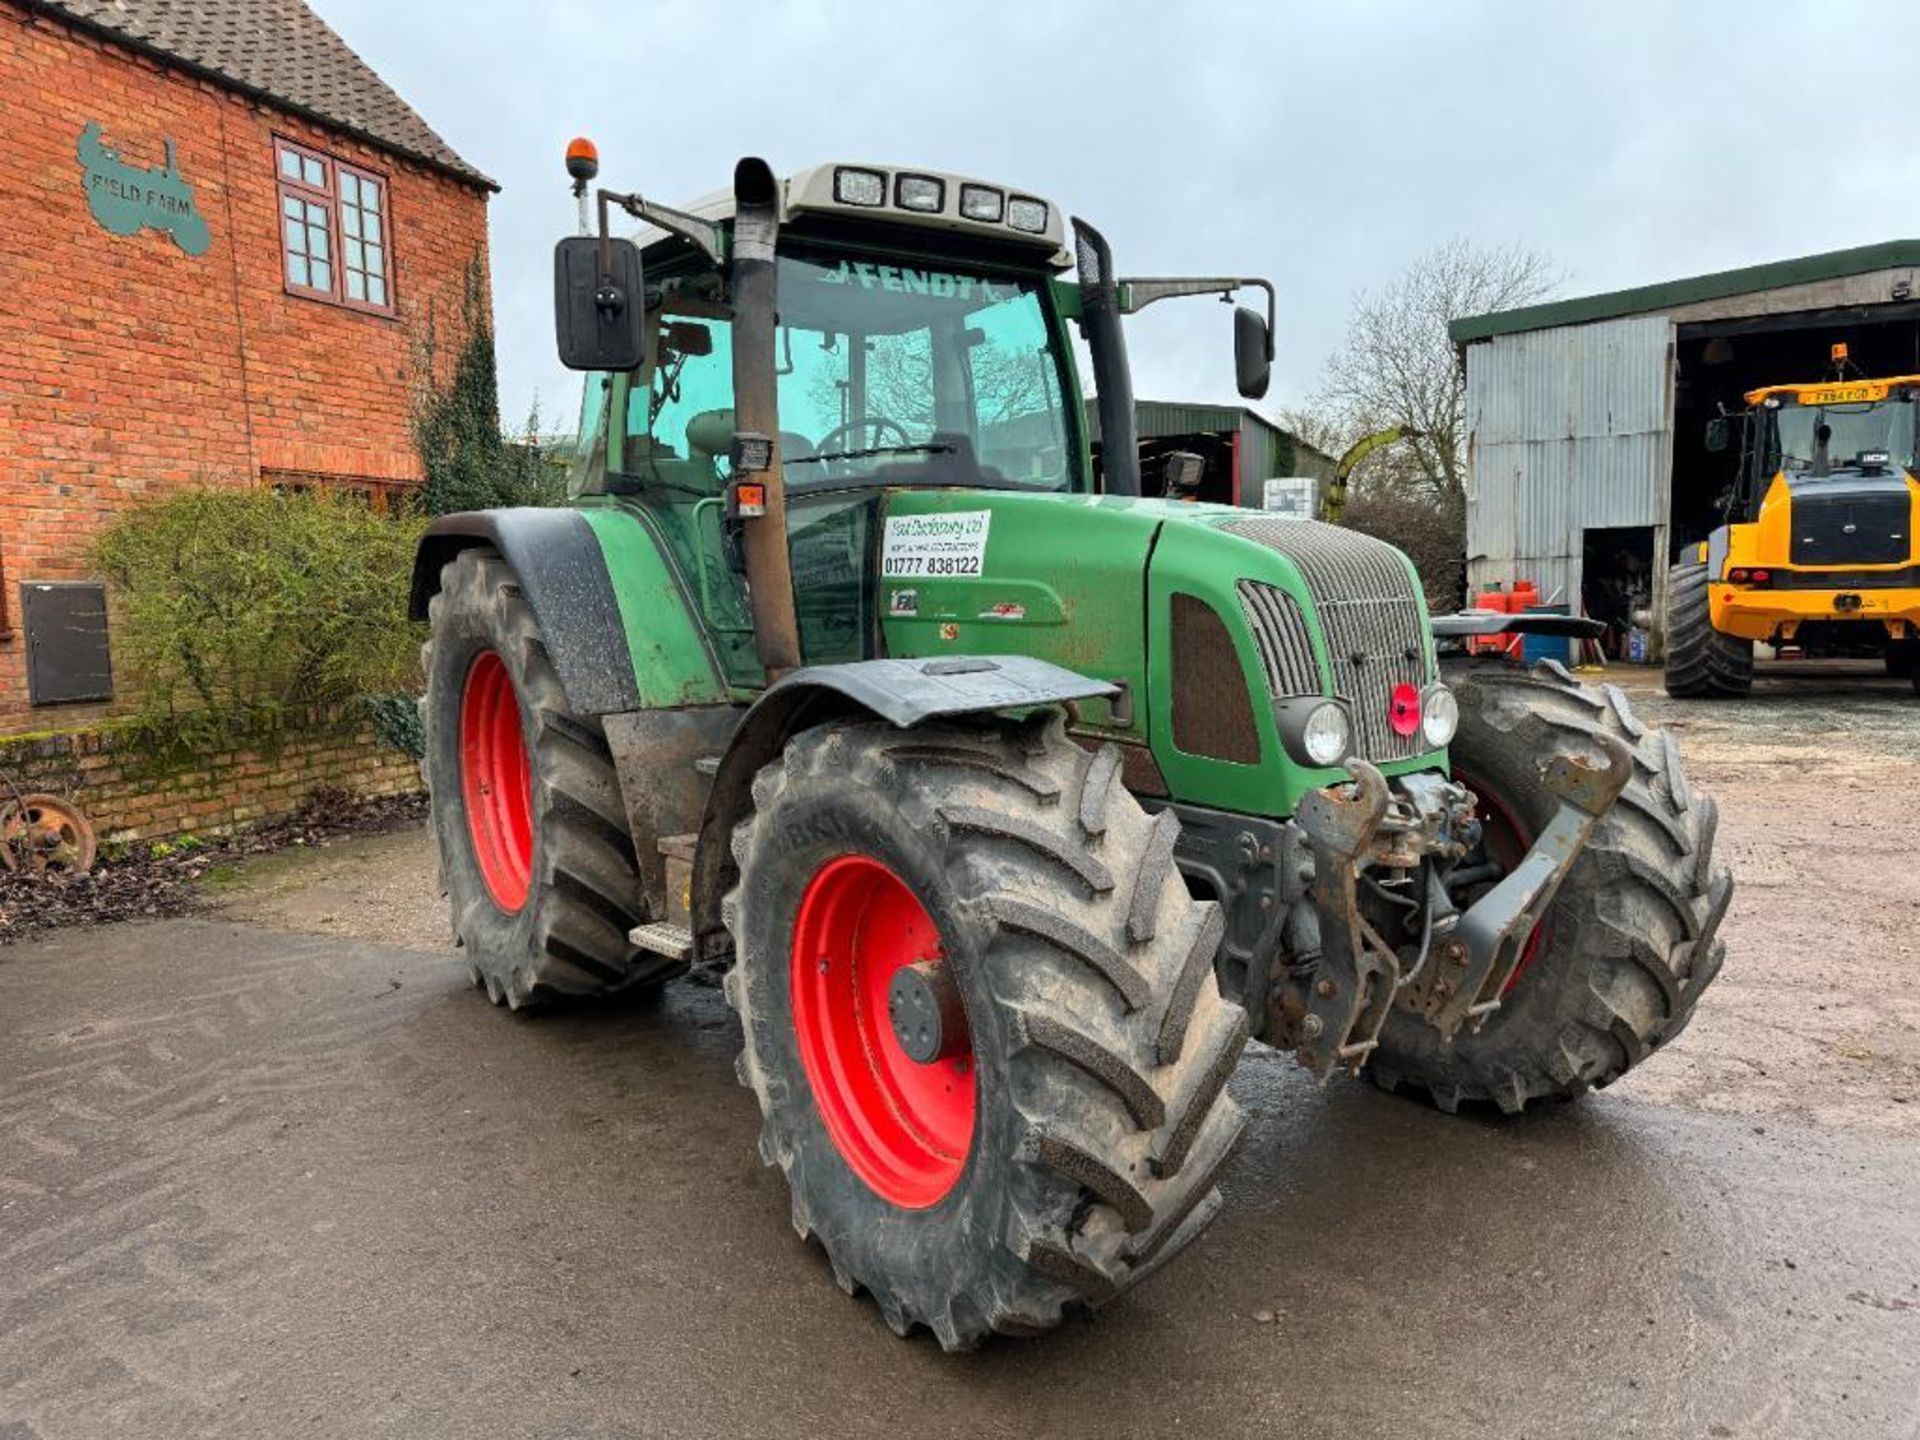 2001 Fendt 716 Vario 50kph 4wd tractor with 4 electric spools, air brakes and front linkage on BKT 5 - Image 16 of 22